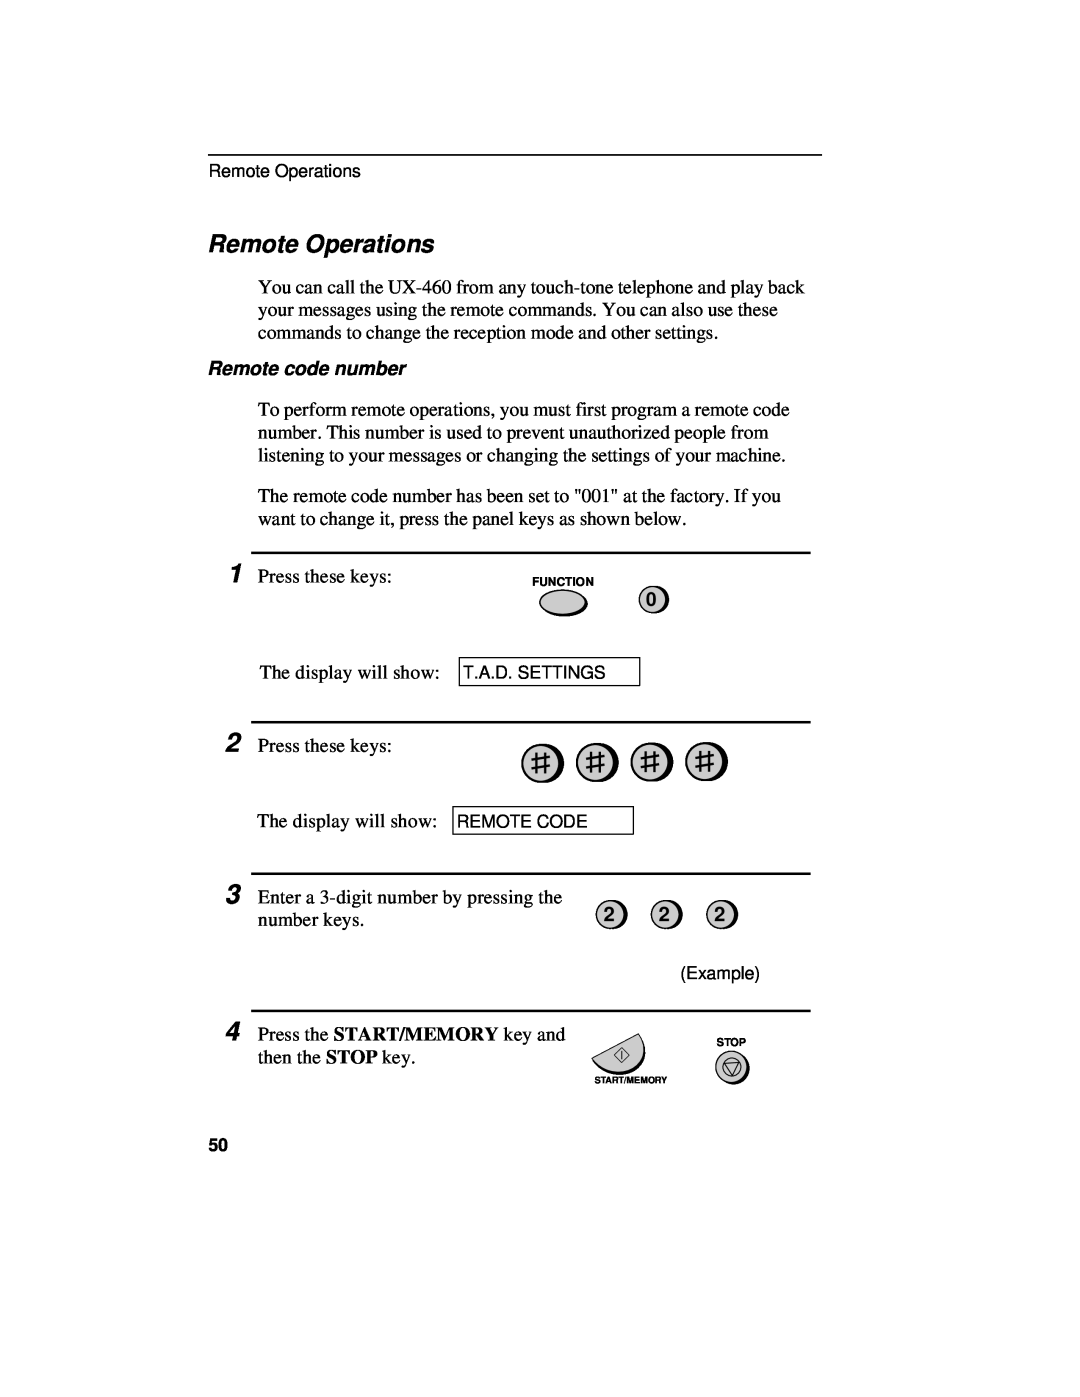 Sharp UX-460 operation manual Remote Operations, Remote code number 